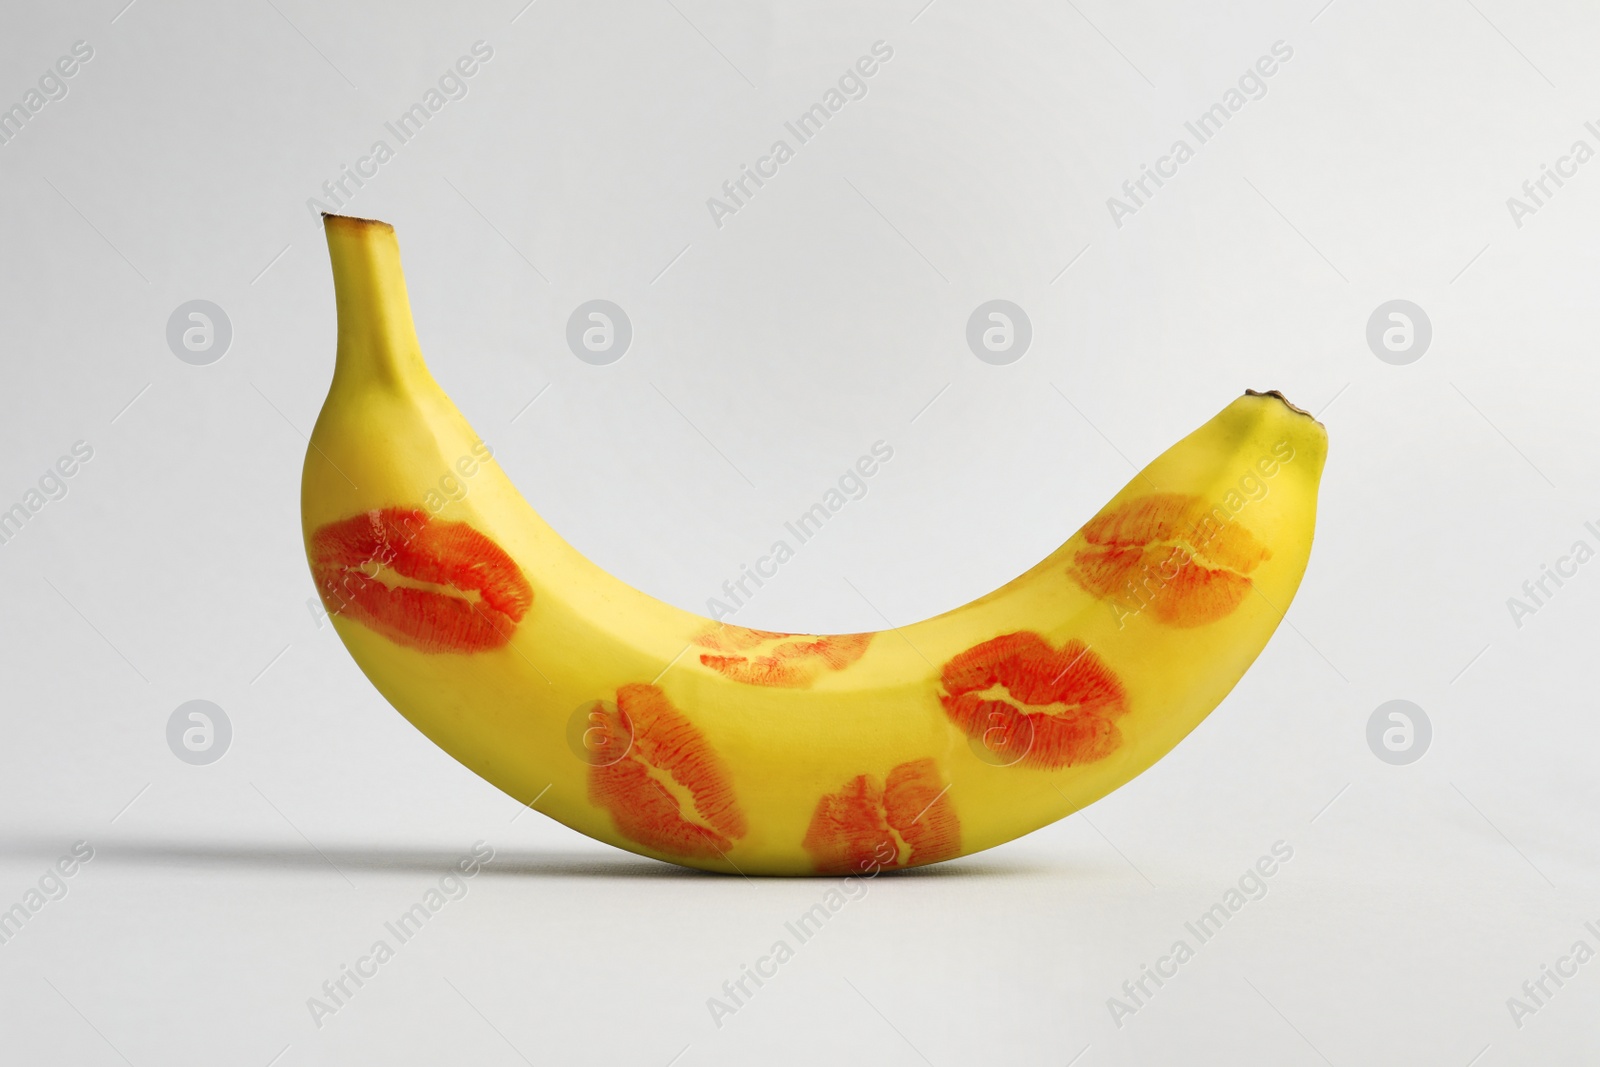 Photo of Banana covered with red lipstick marks on light grey background. Potency concept